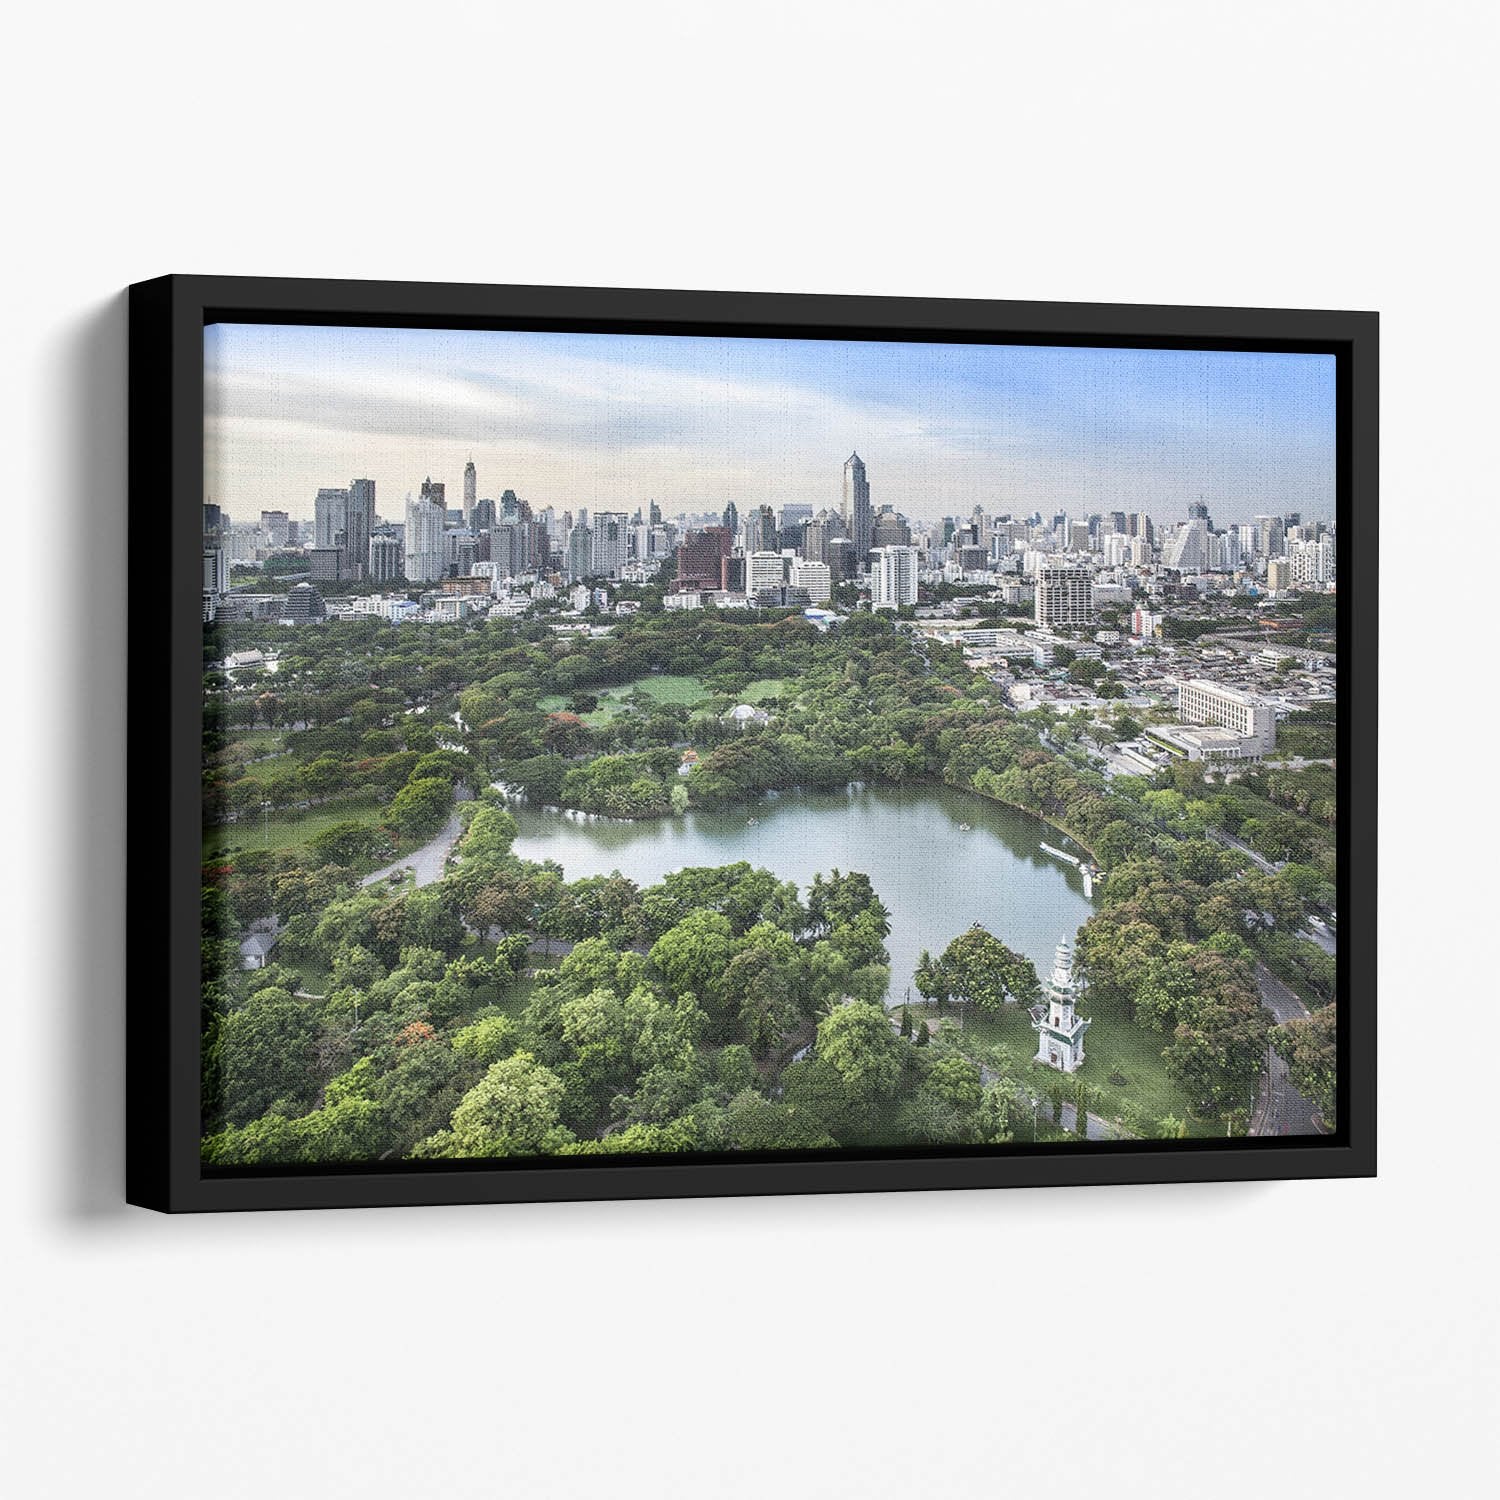 Modern city in a green environment Floating Framed Canvas